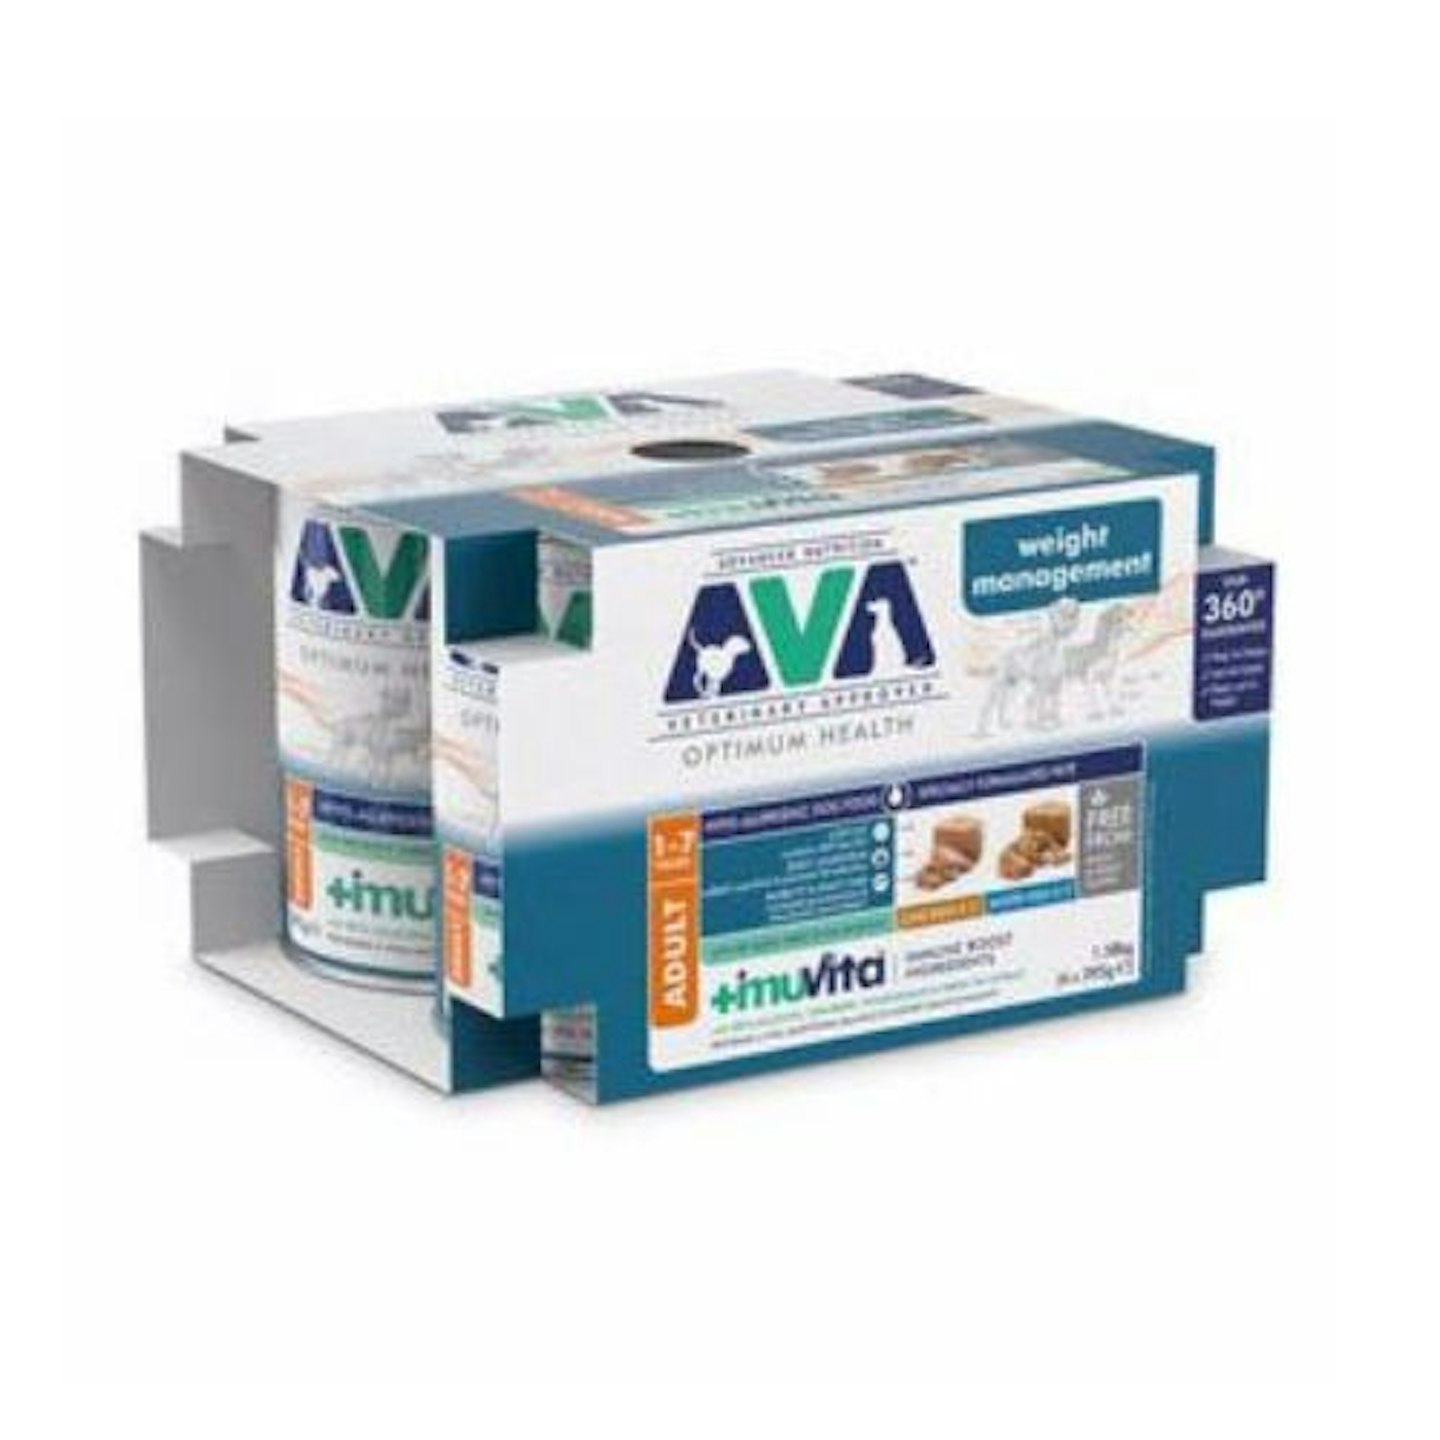 AVA Veterinary Approved Optimum Health Adult Weight Management Dog Food